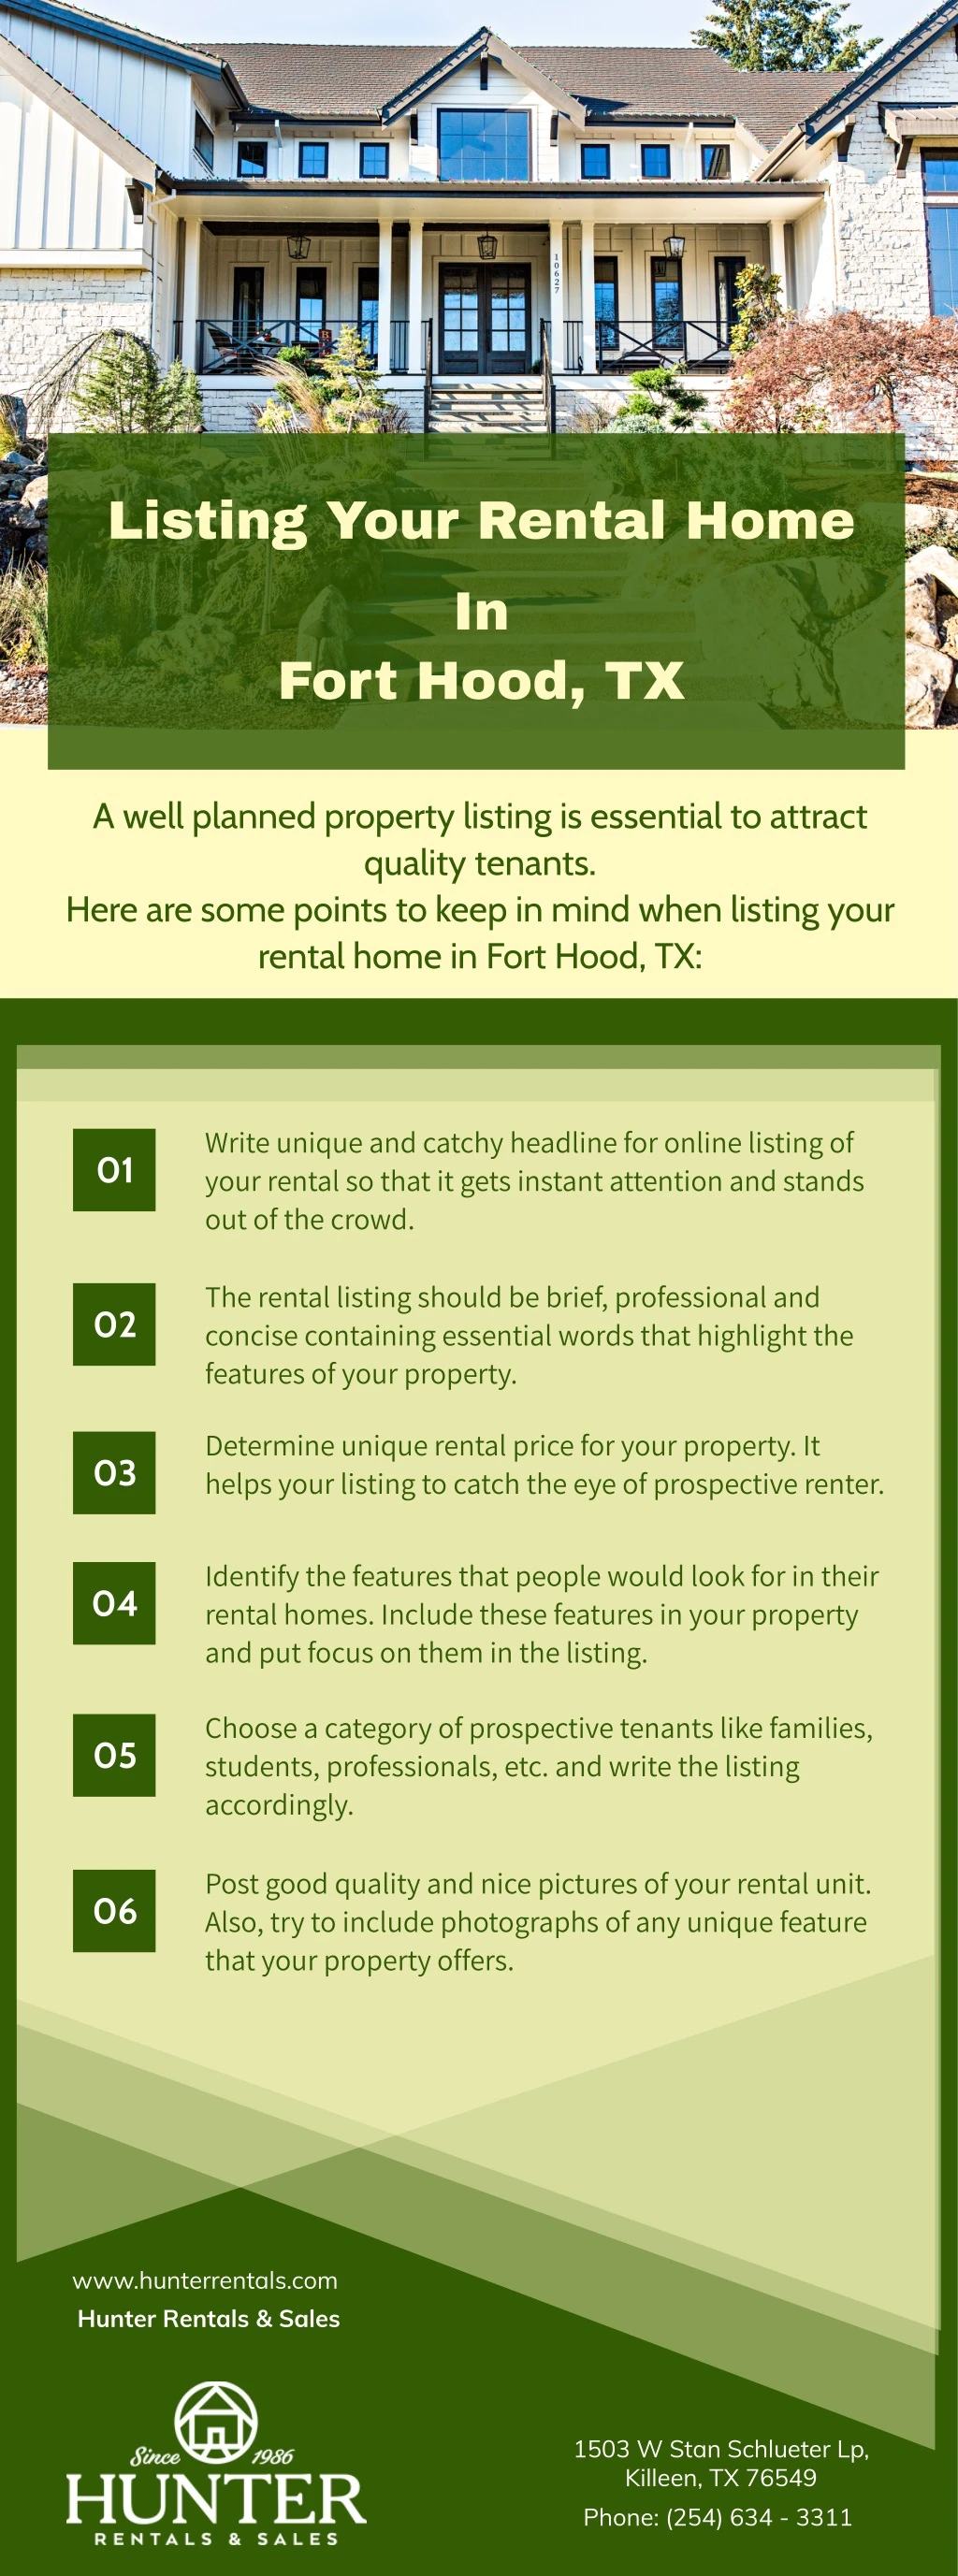 listing your rental home